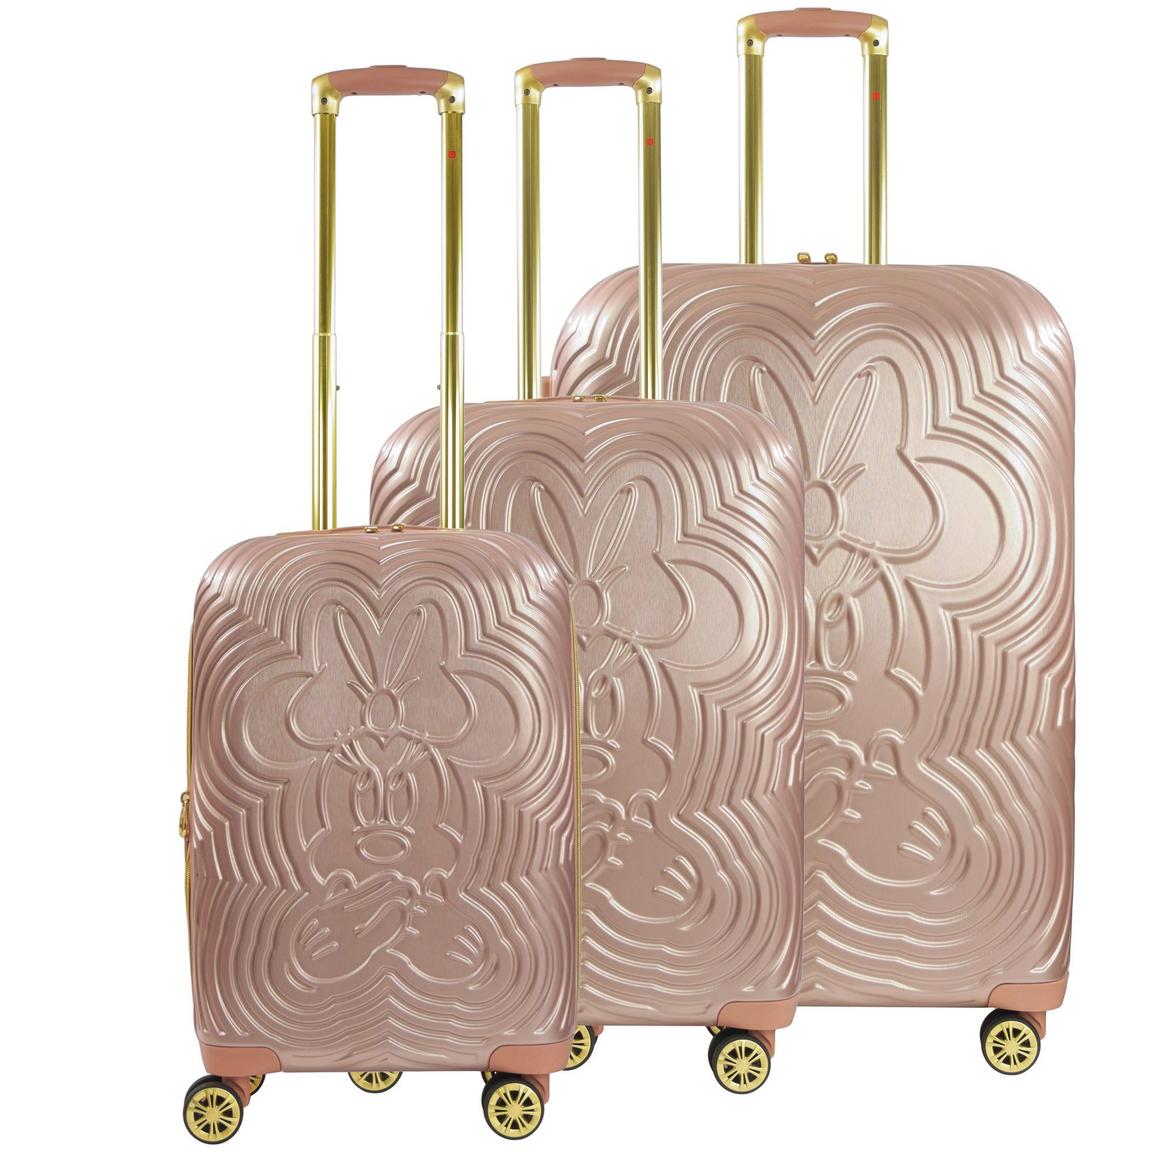 Concept One Disney Ful Minnie Mouse Playful Molded Hard-Sided Roller Luggage 3-Piece Set - Rose Gold, Rosegold